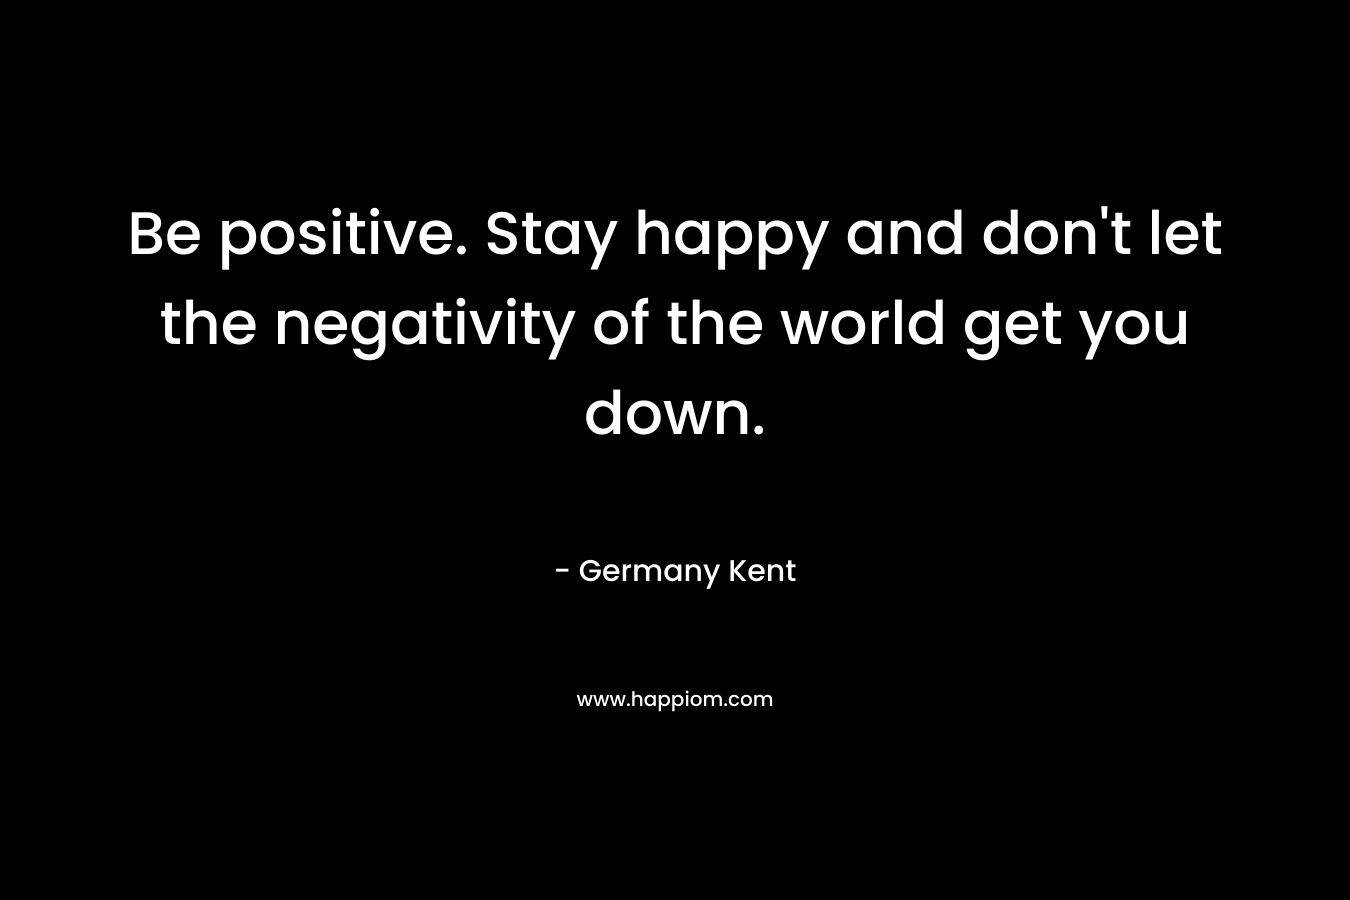 Be positive. Stay happy and don't let the negativity of the world get you down.